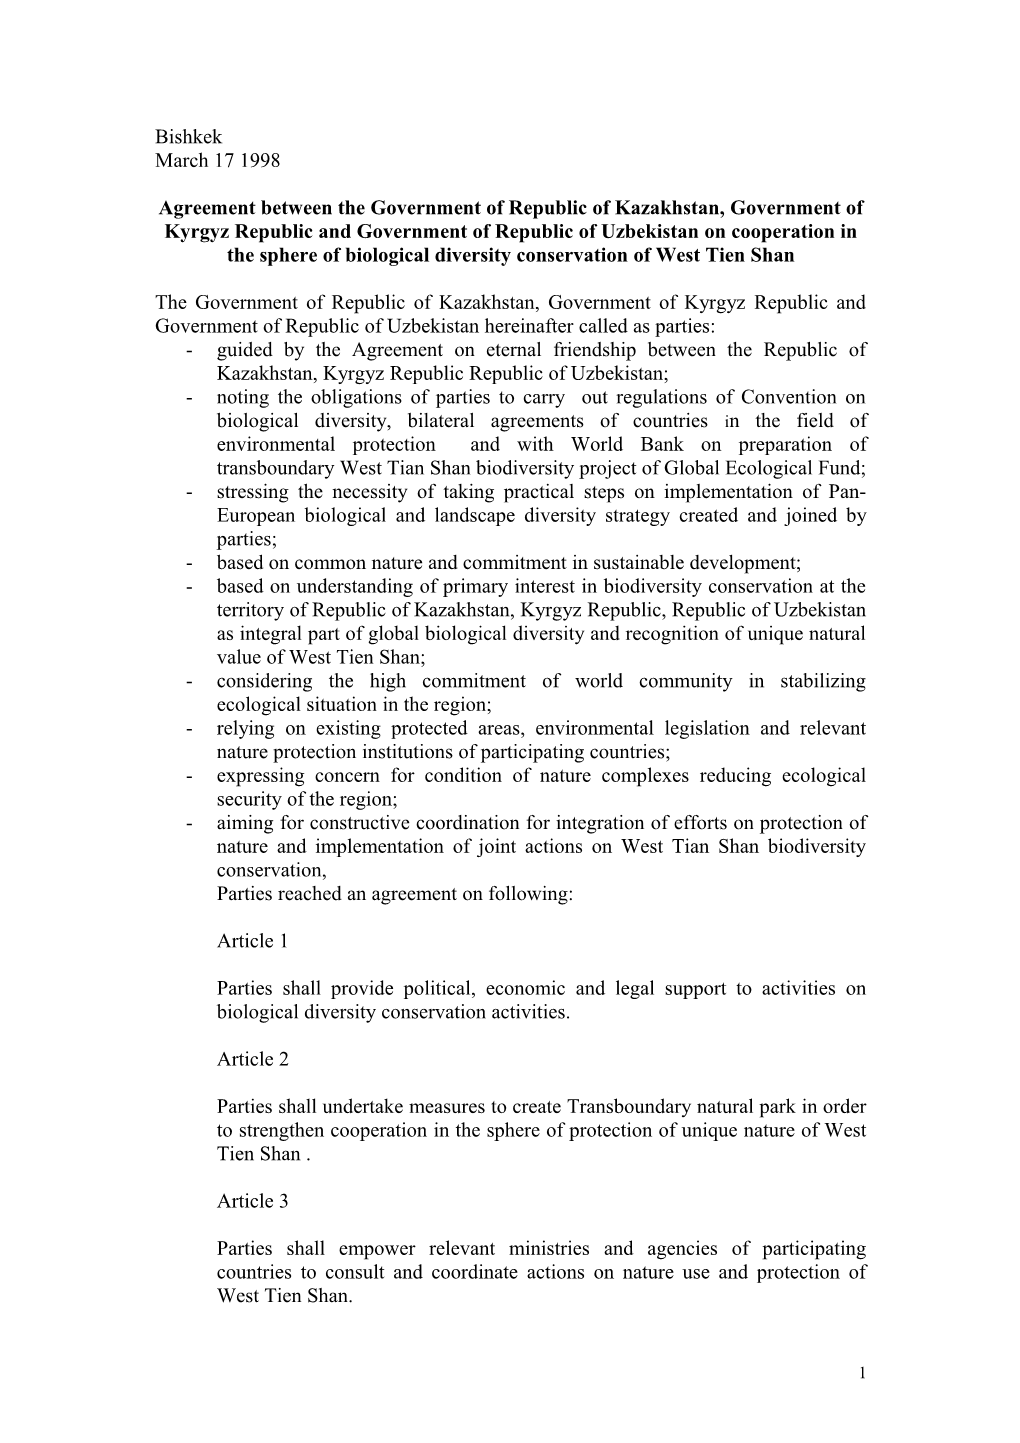 Agreement Between the Government of Republic of Kazakhstan, Government of Kyrgyz Republic